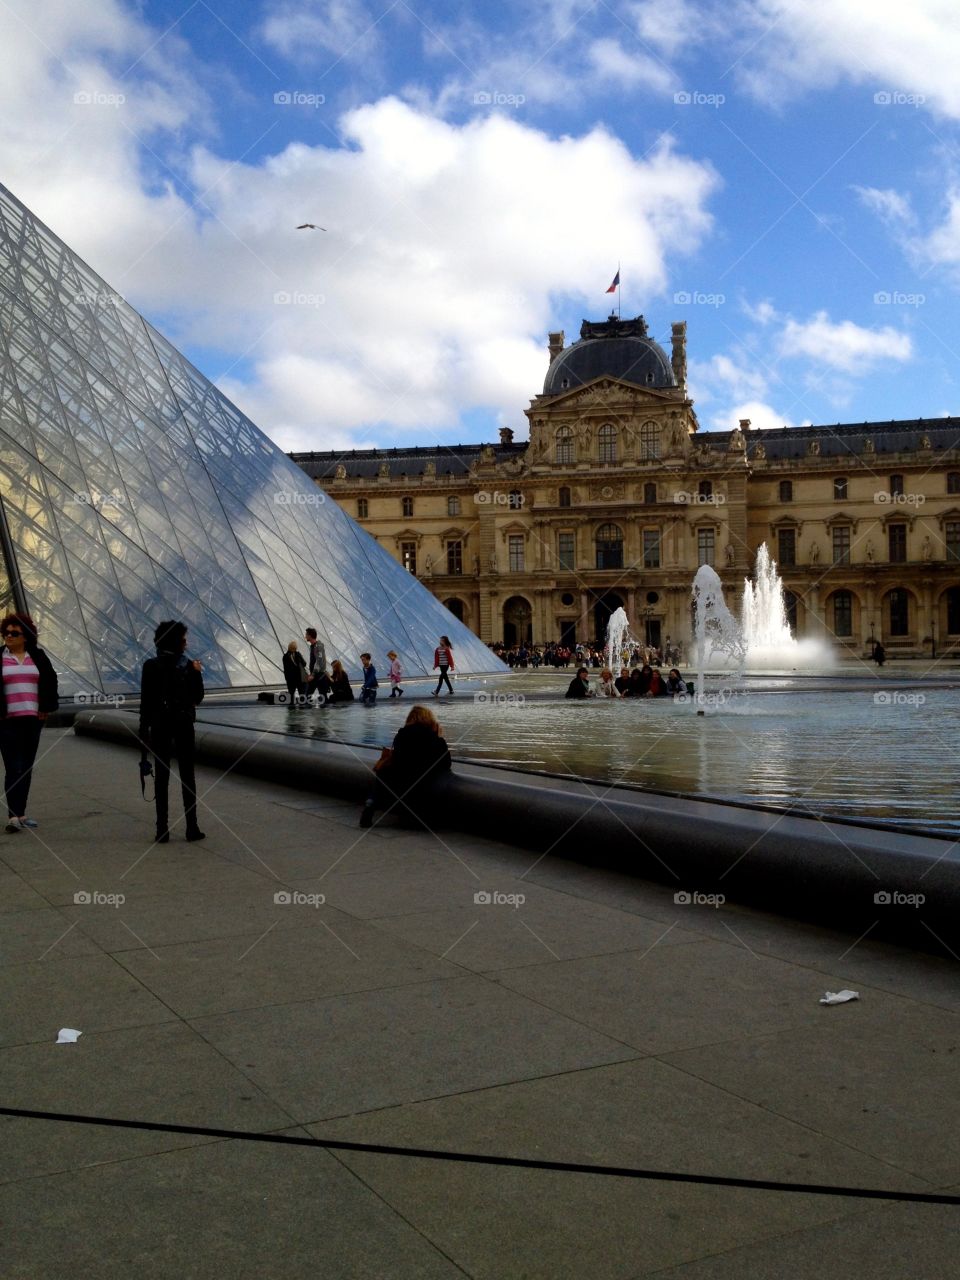 The Louvre in color